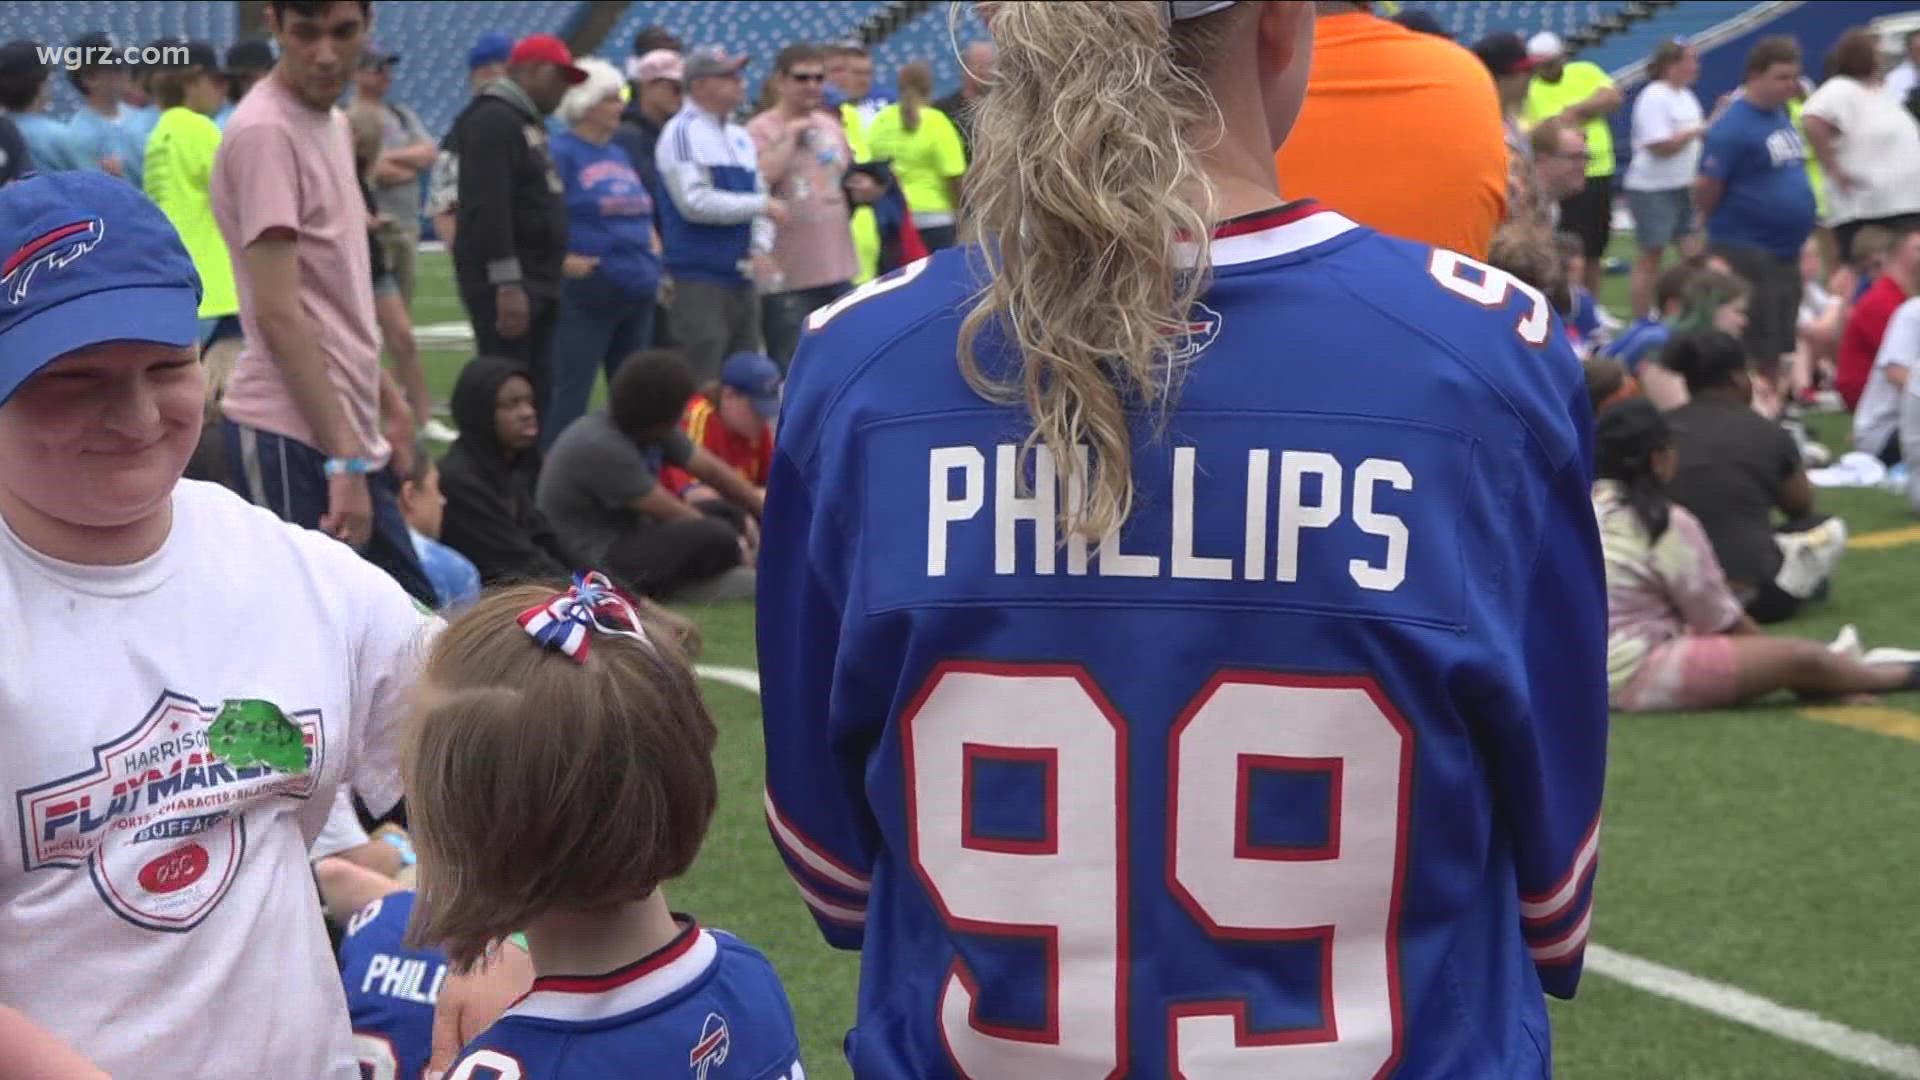 You can take the man out of Buffalo, but you can't take Buffalo out of the man. Former Bills player Harrison Phillips is back in the city of good neighbors.